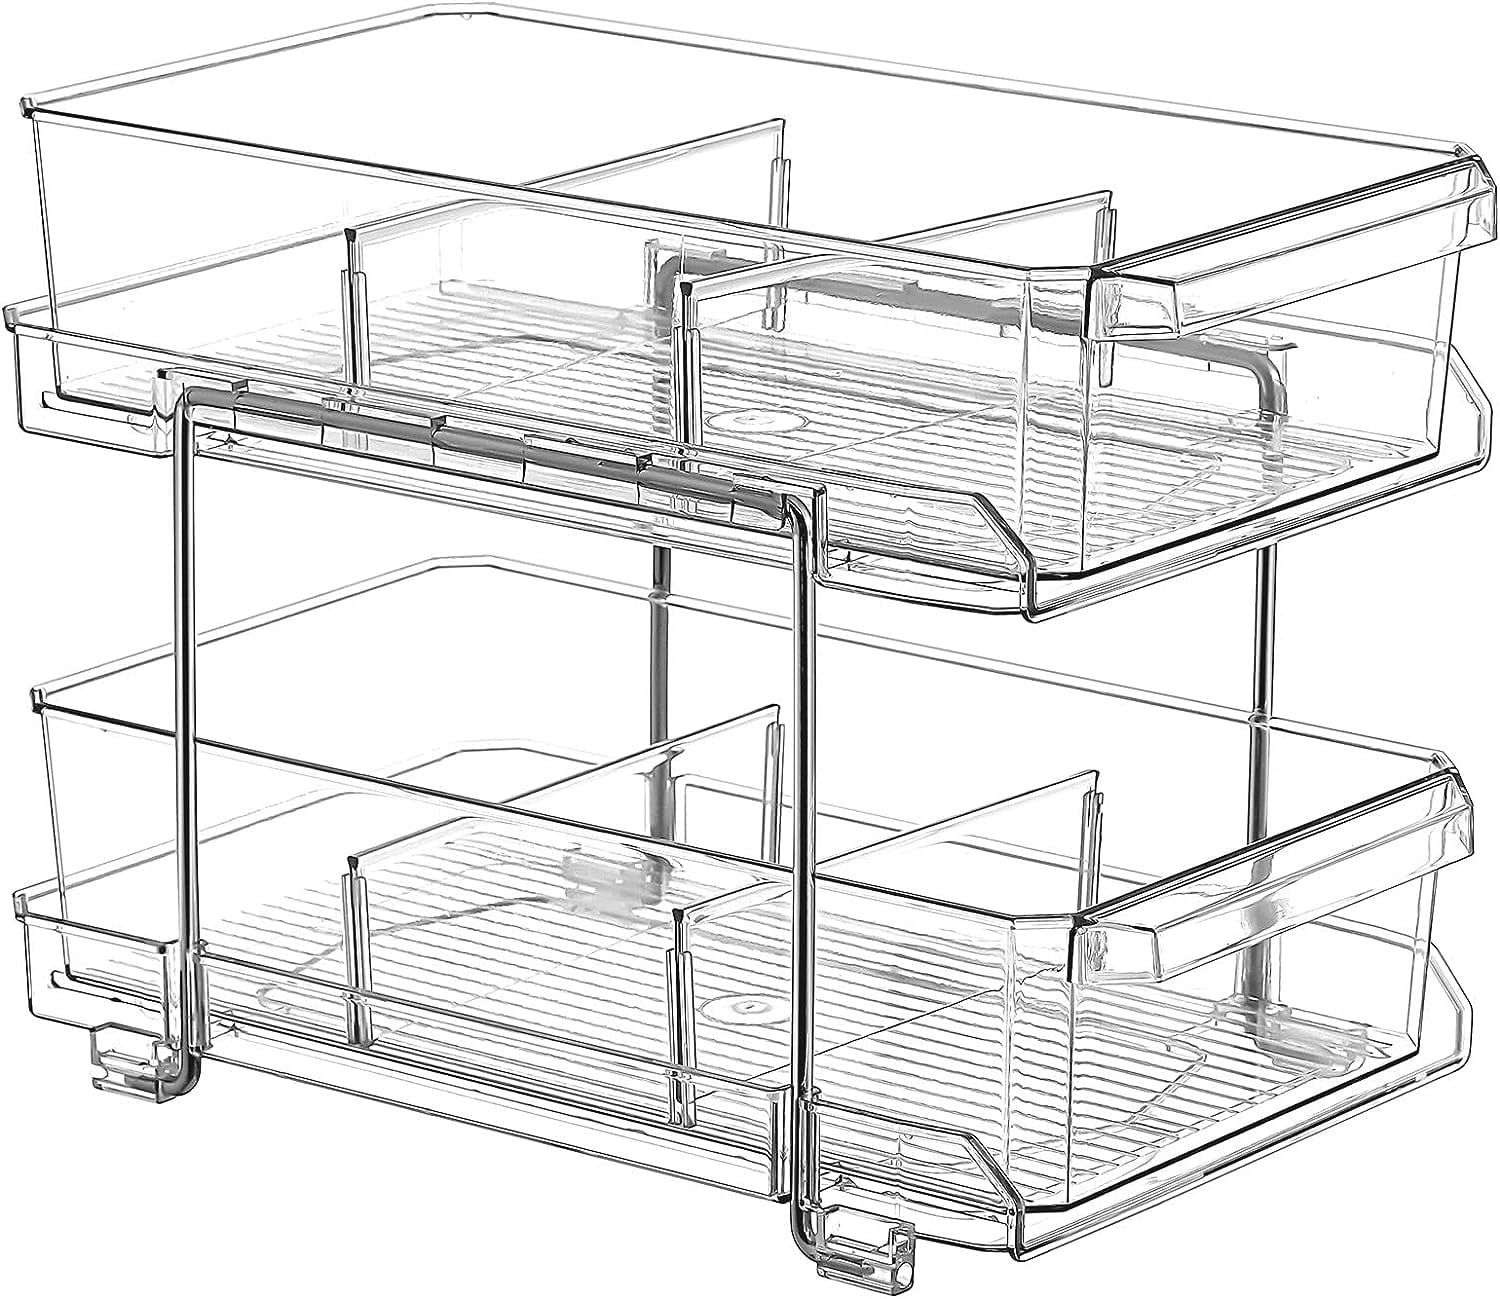 DOMNIU 2 Tier Clear Organizer with Dividers, Pantry Organization